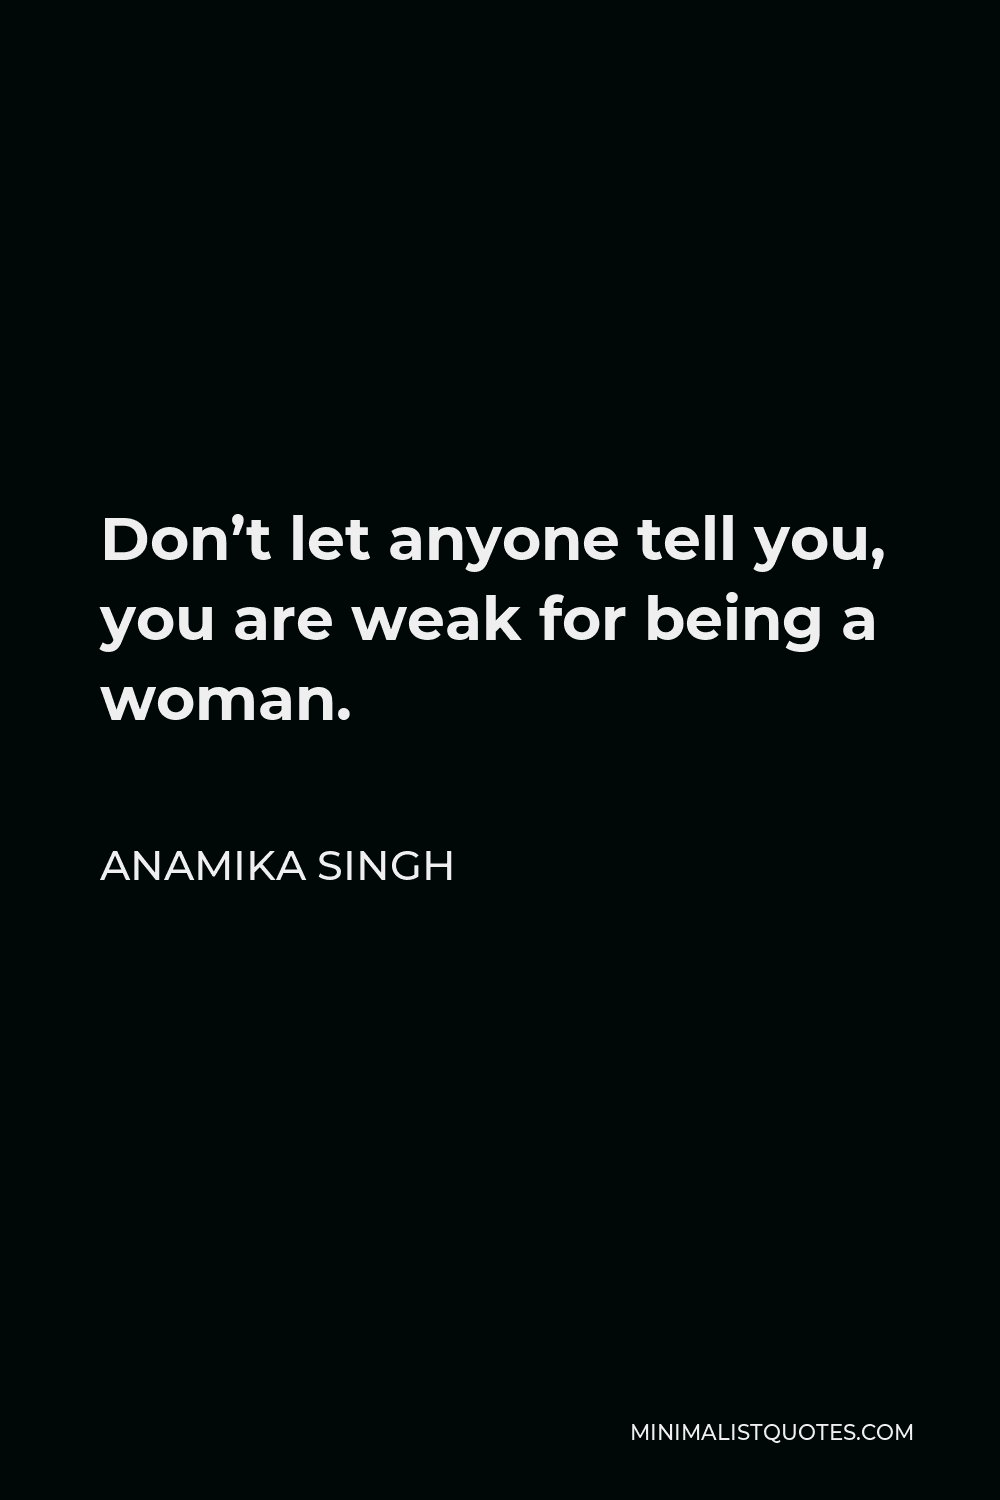 Anamika Singh Quote - Don’t let anyone tell you, you are weak for being a woman.